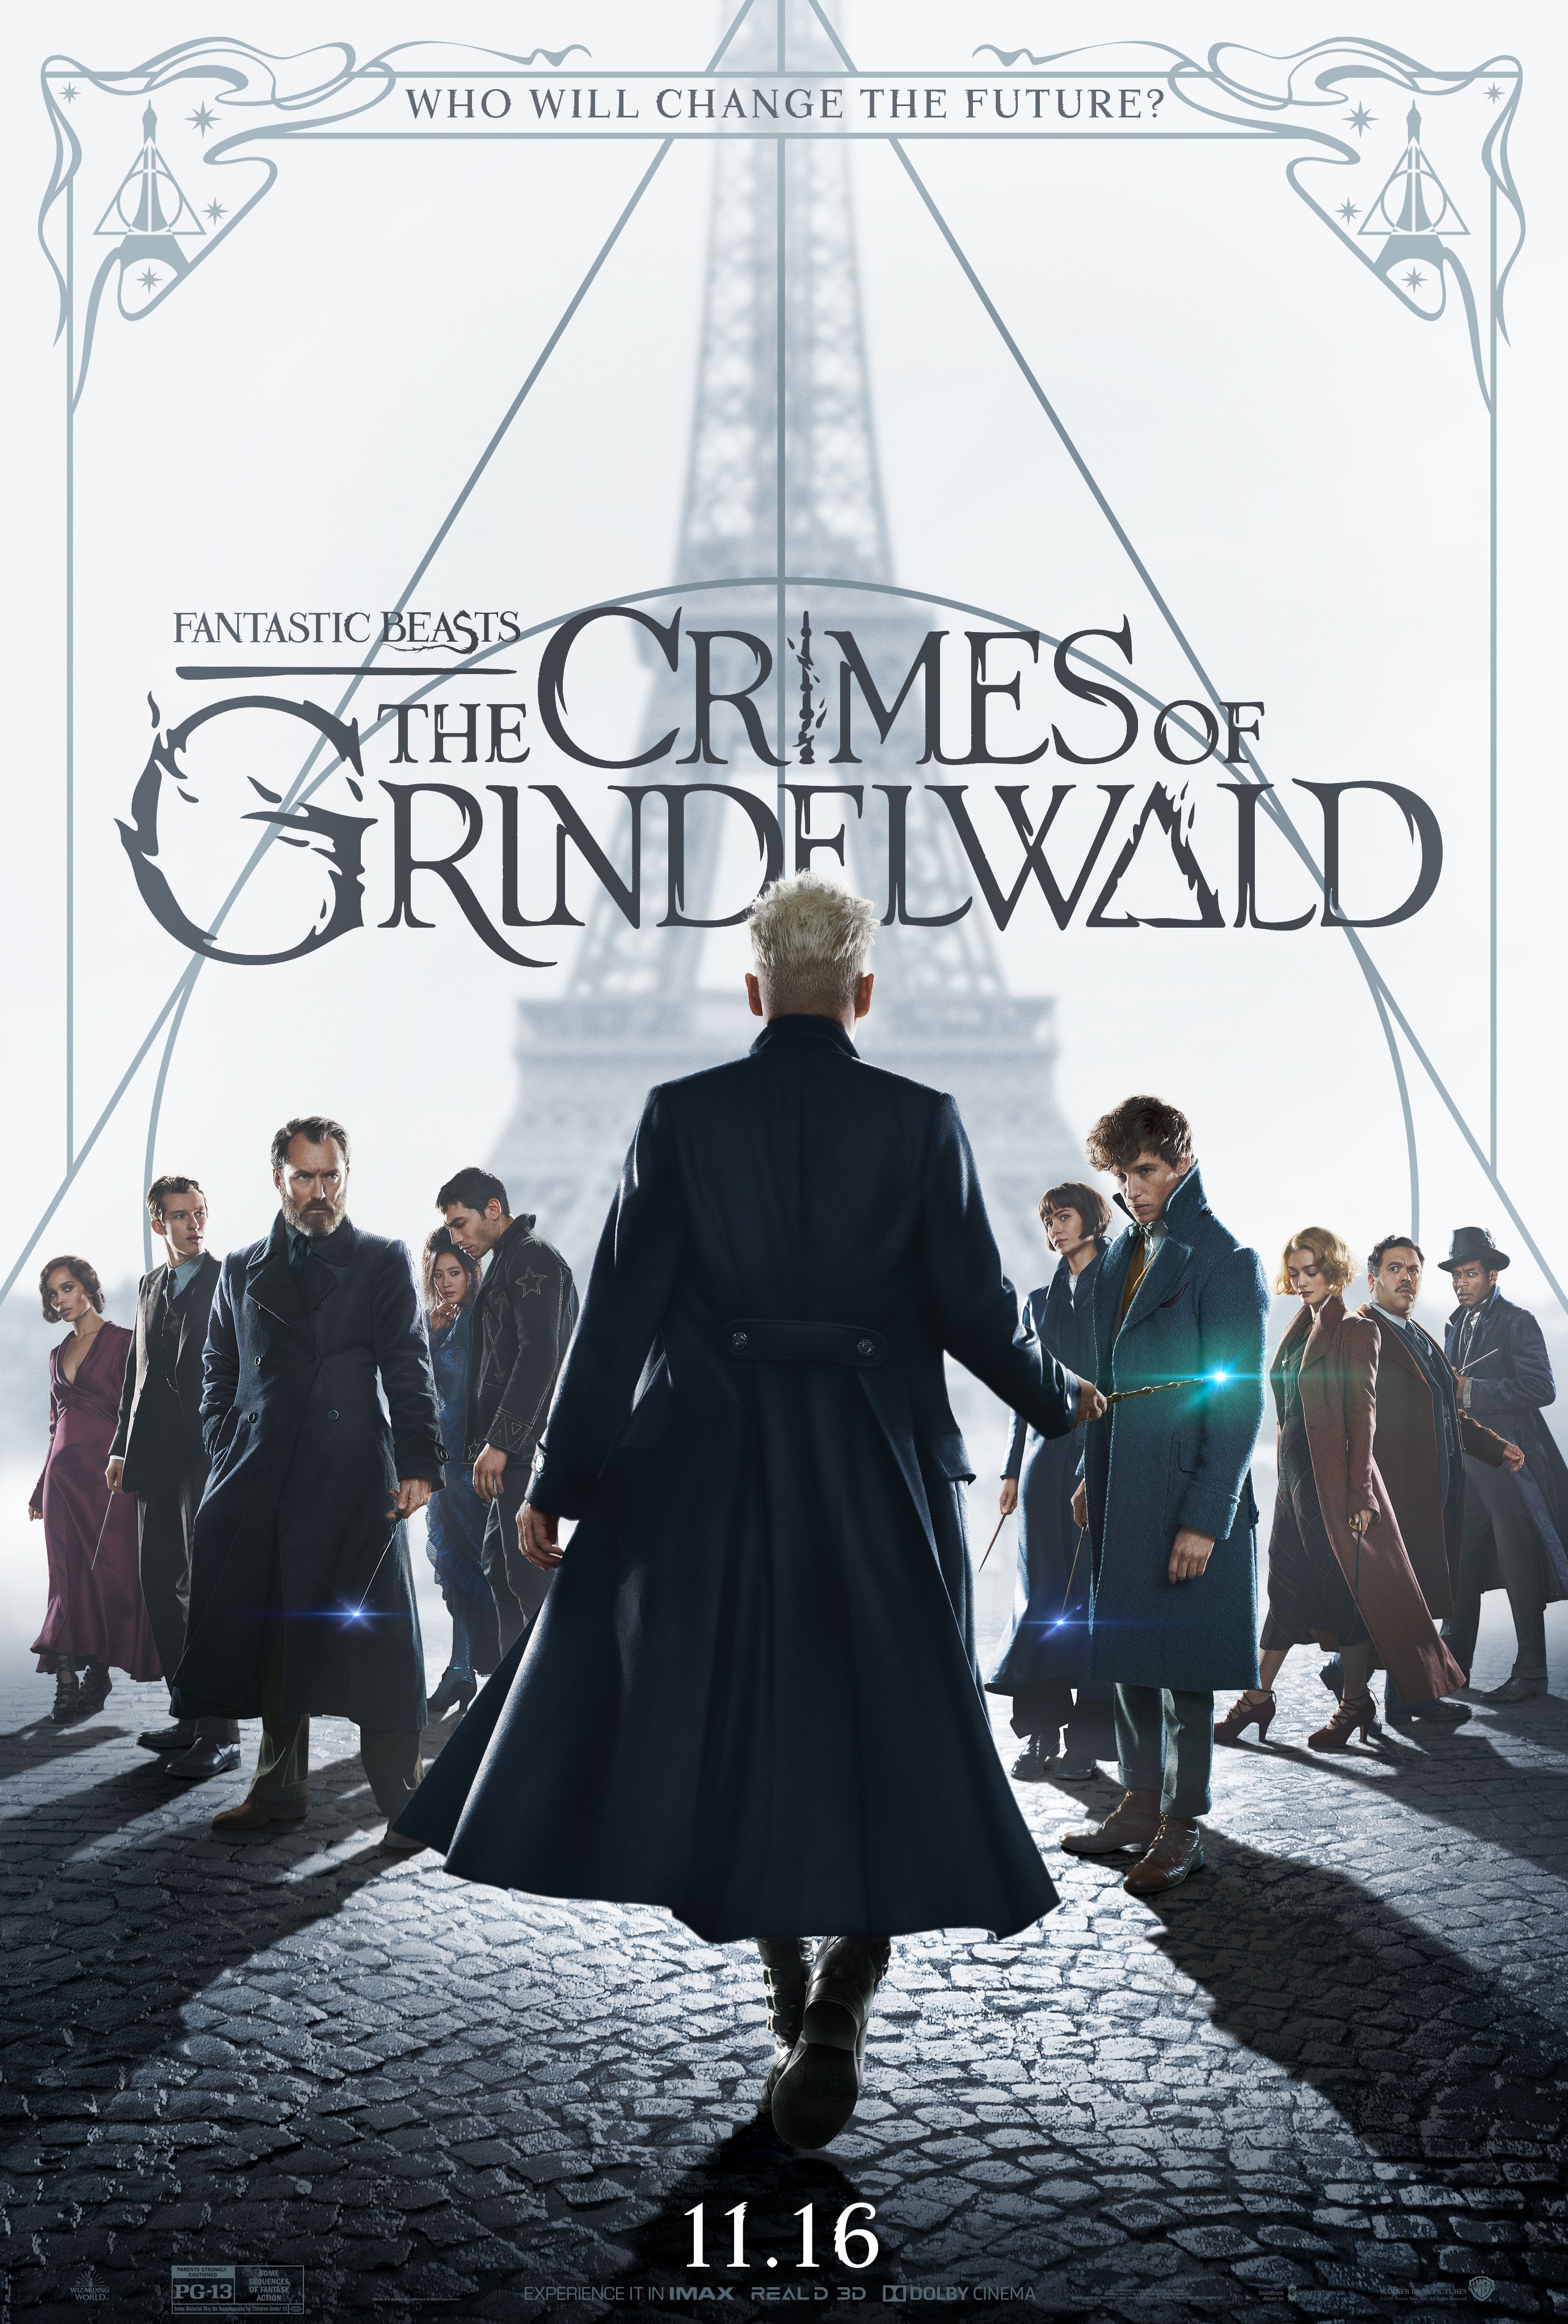 Fantastic Beasts: The Crimes of Grindelwald - Rotten Tomatoes